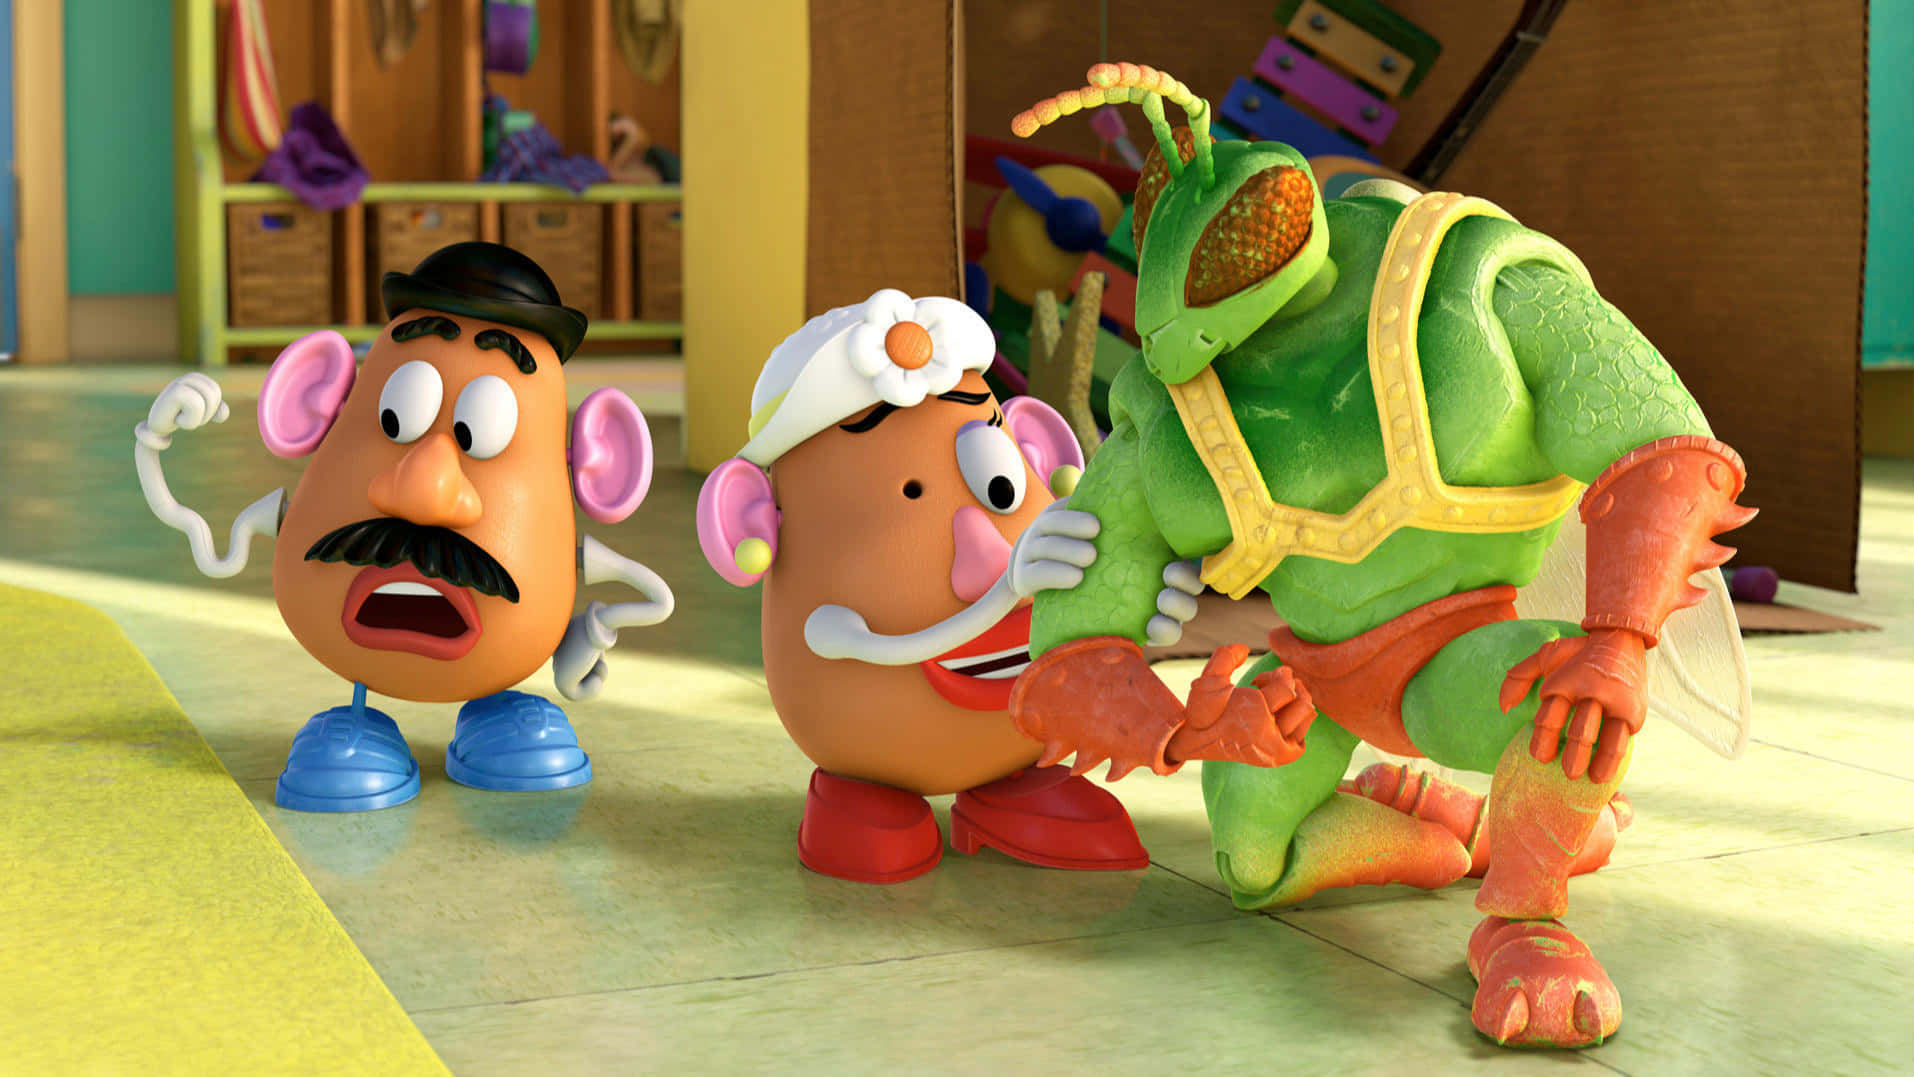 Fun for the Whole Family - Mr. Potato Head offers endless entertainment